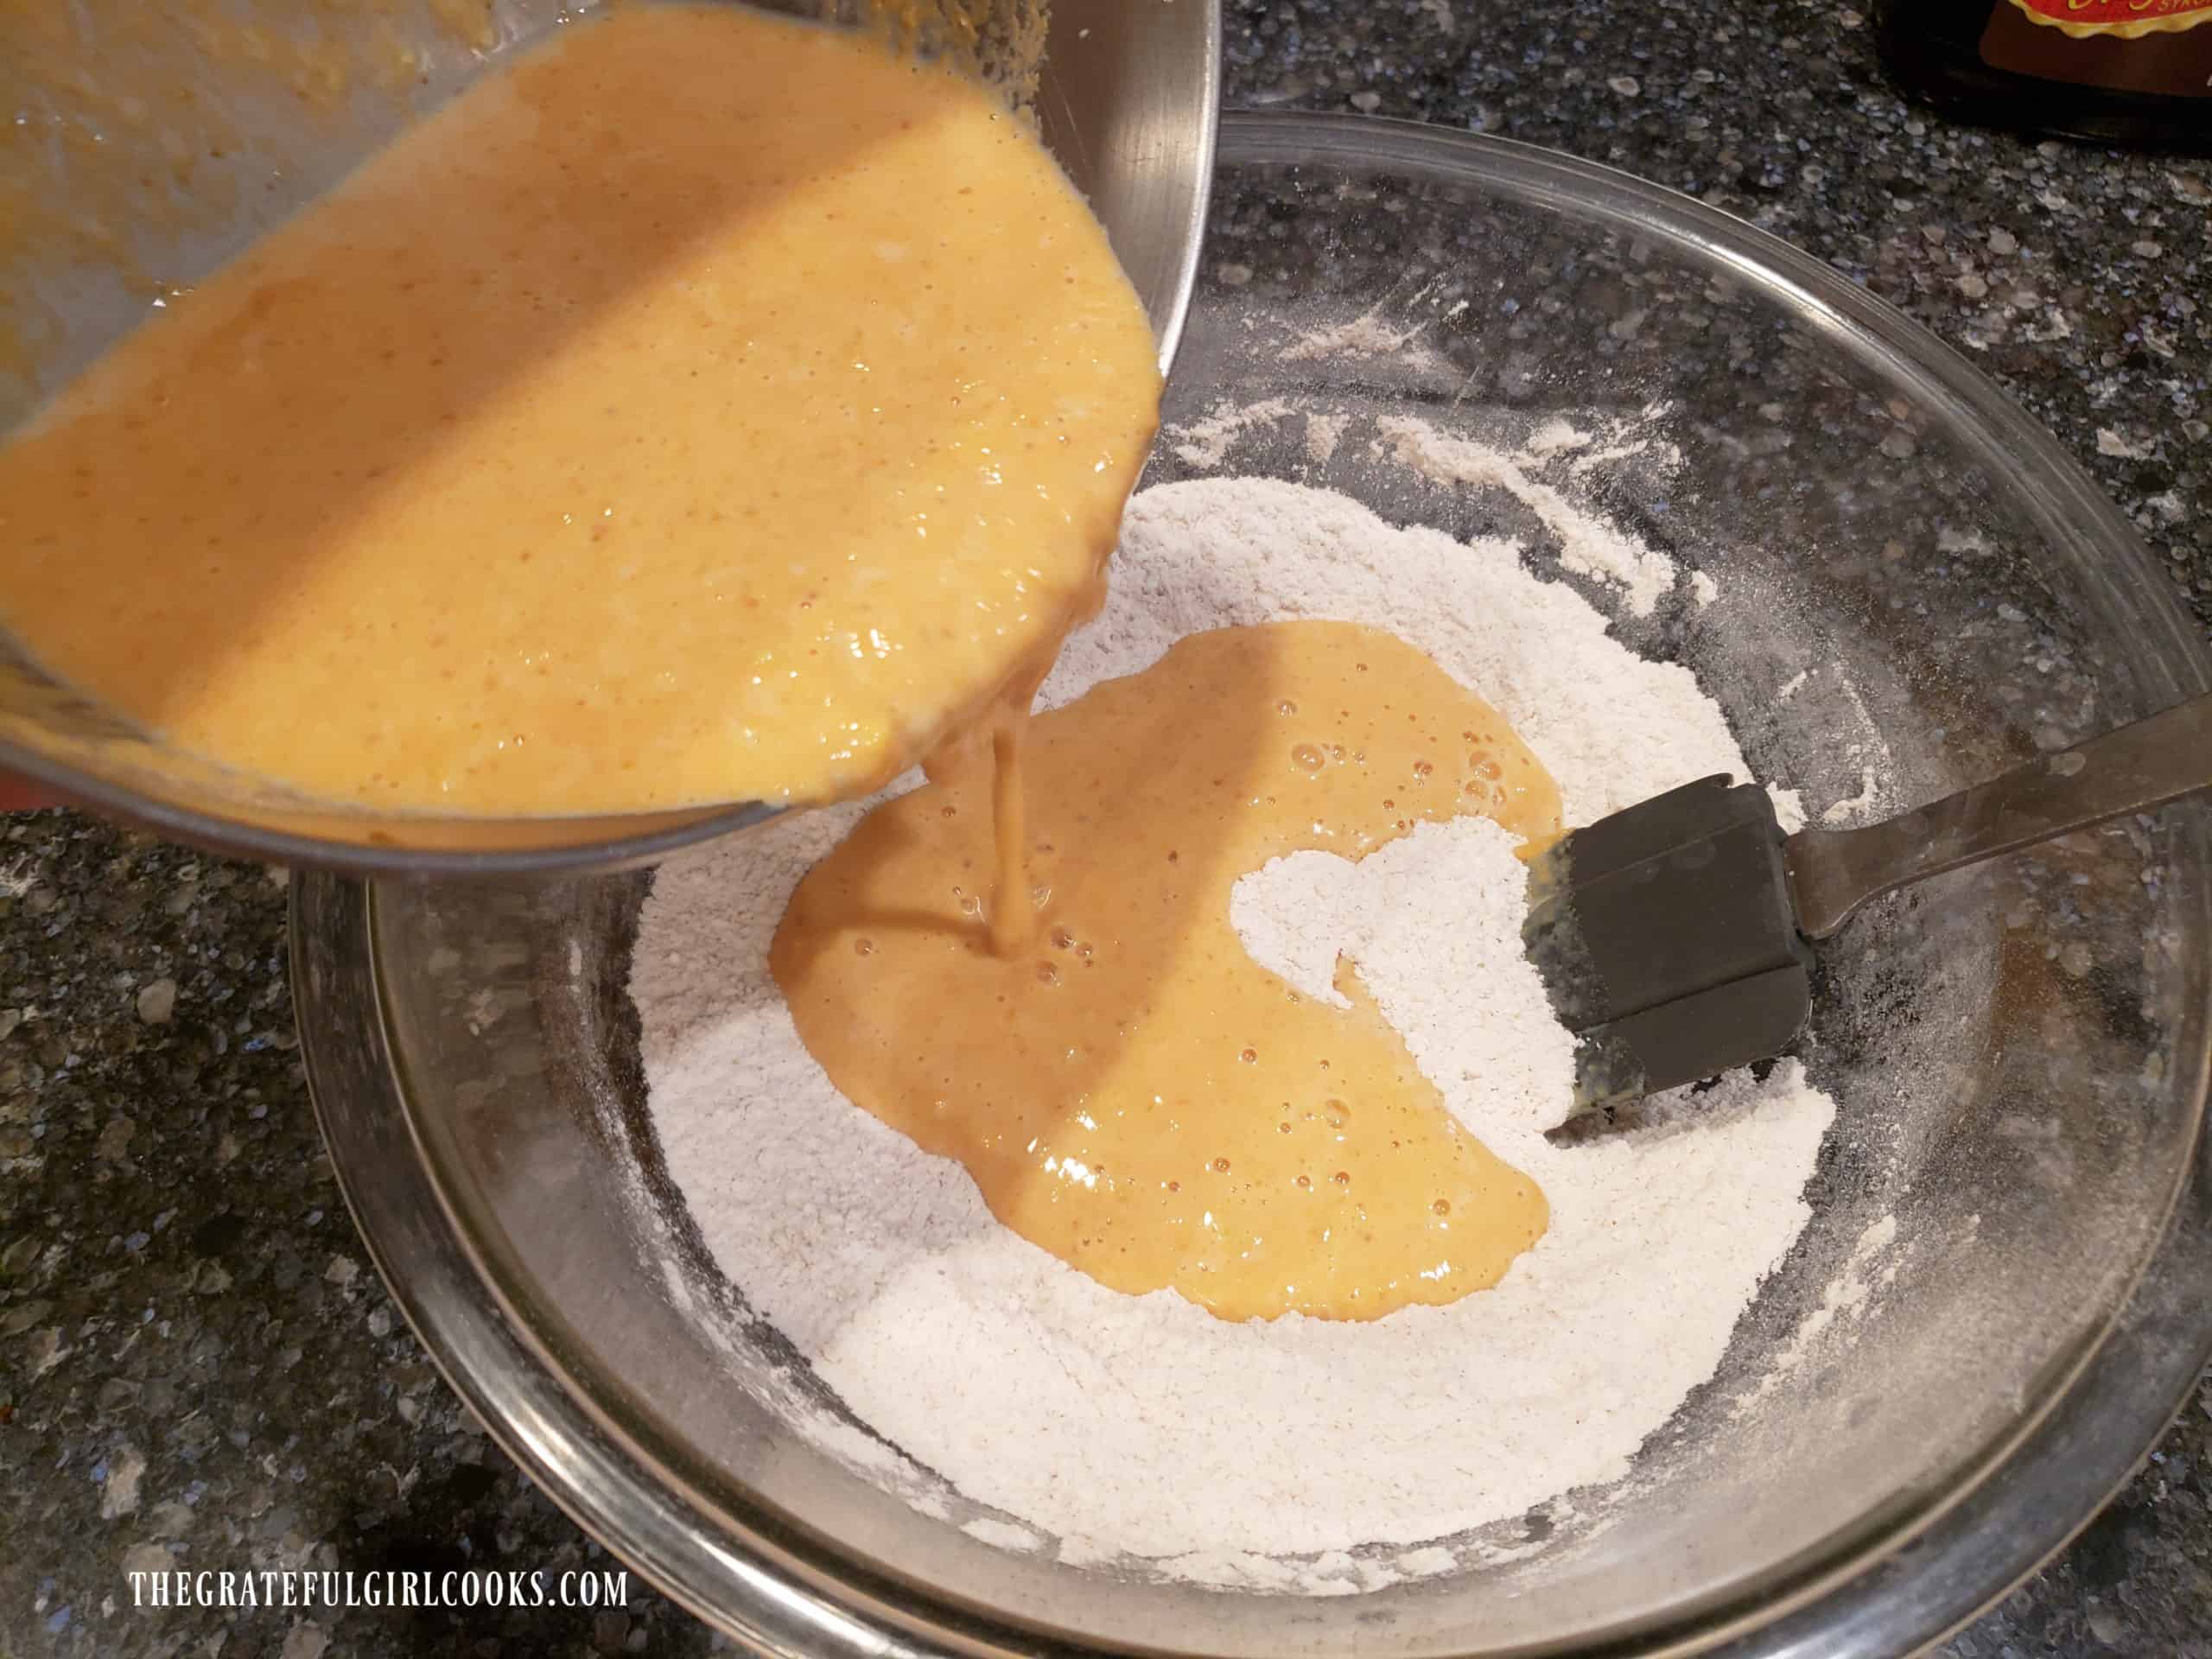 Pumpkin-flavored batter is added to the dry ingredients for the waffles.